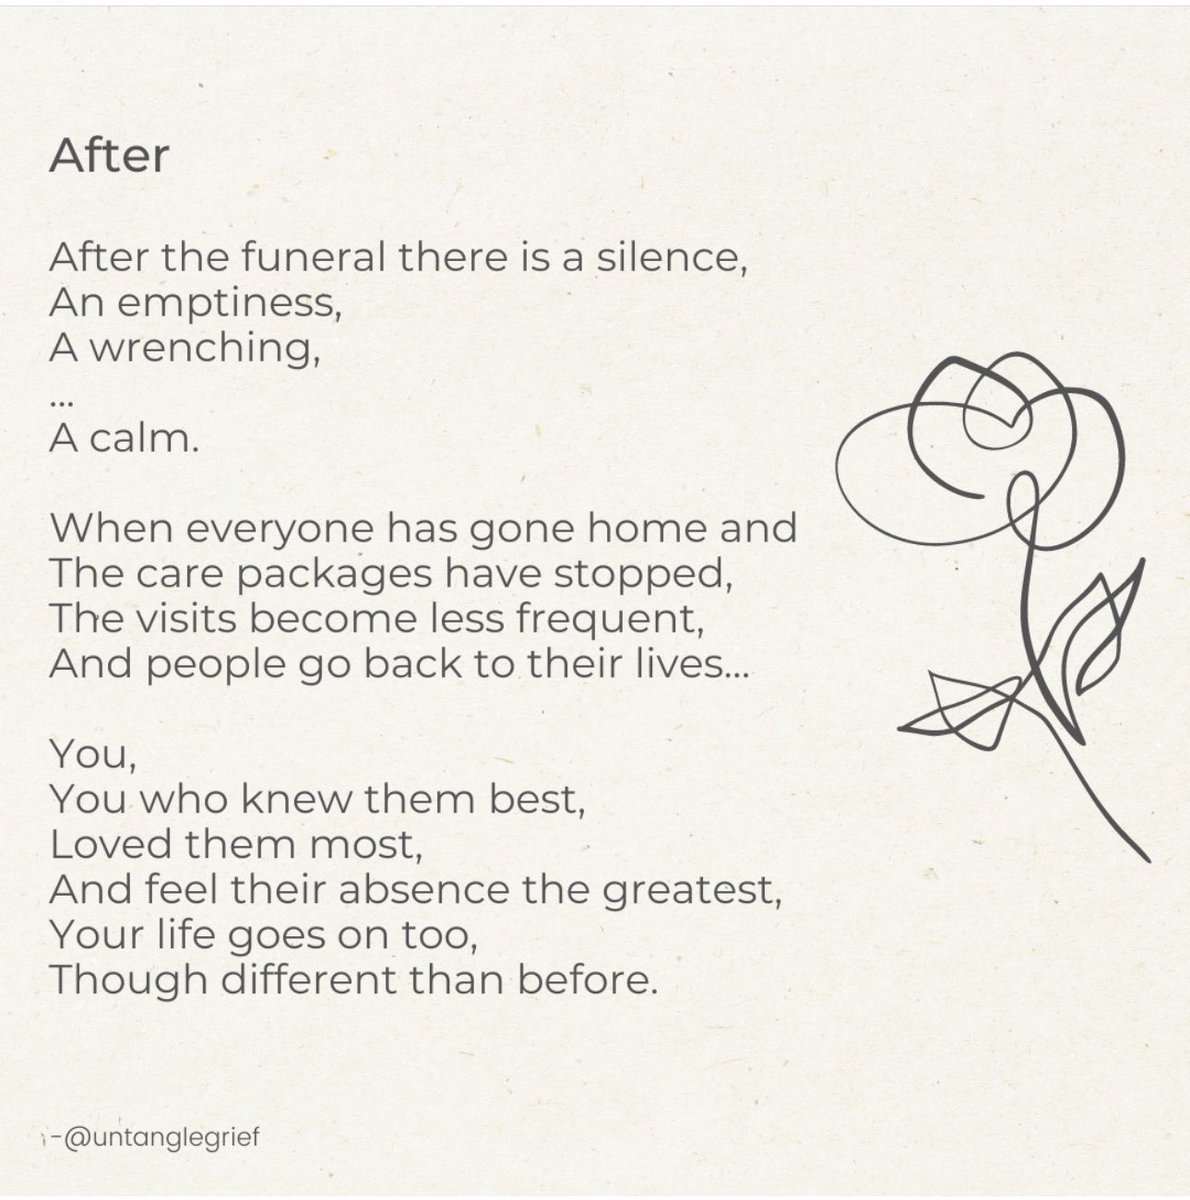 This is so true. Please reach out to those grieving after the funeral. It can often be the loneliest time. 🧡